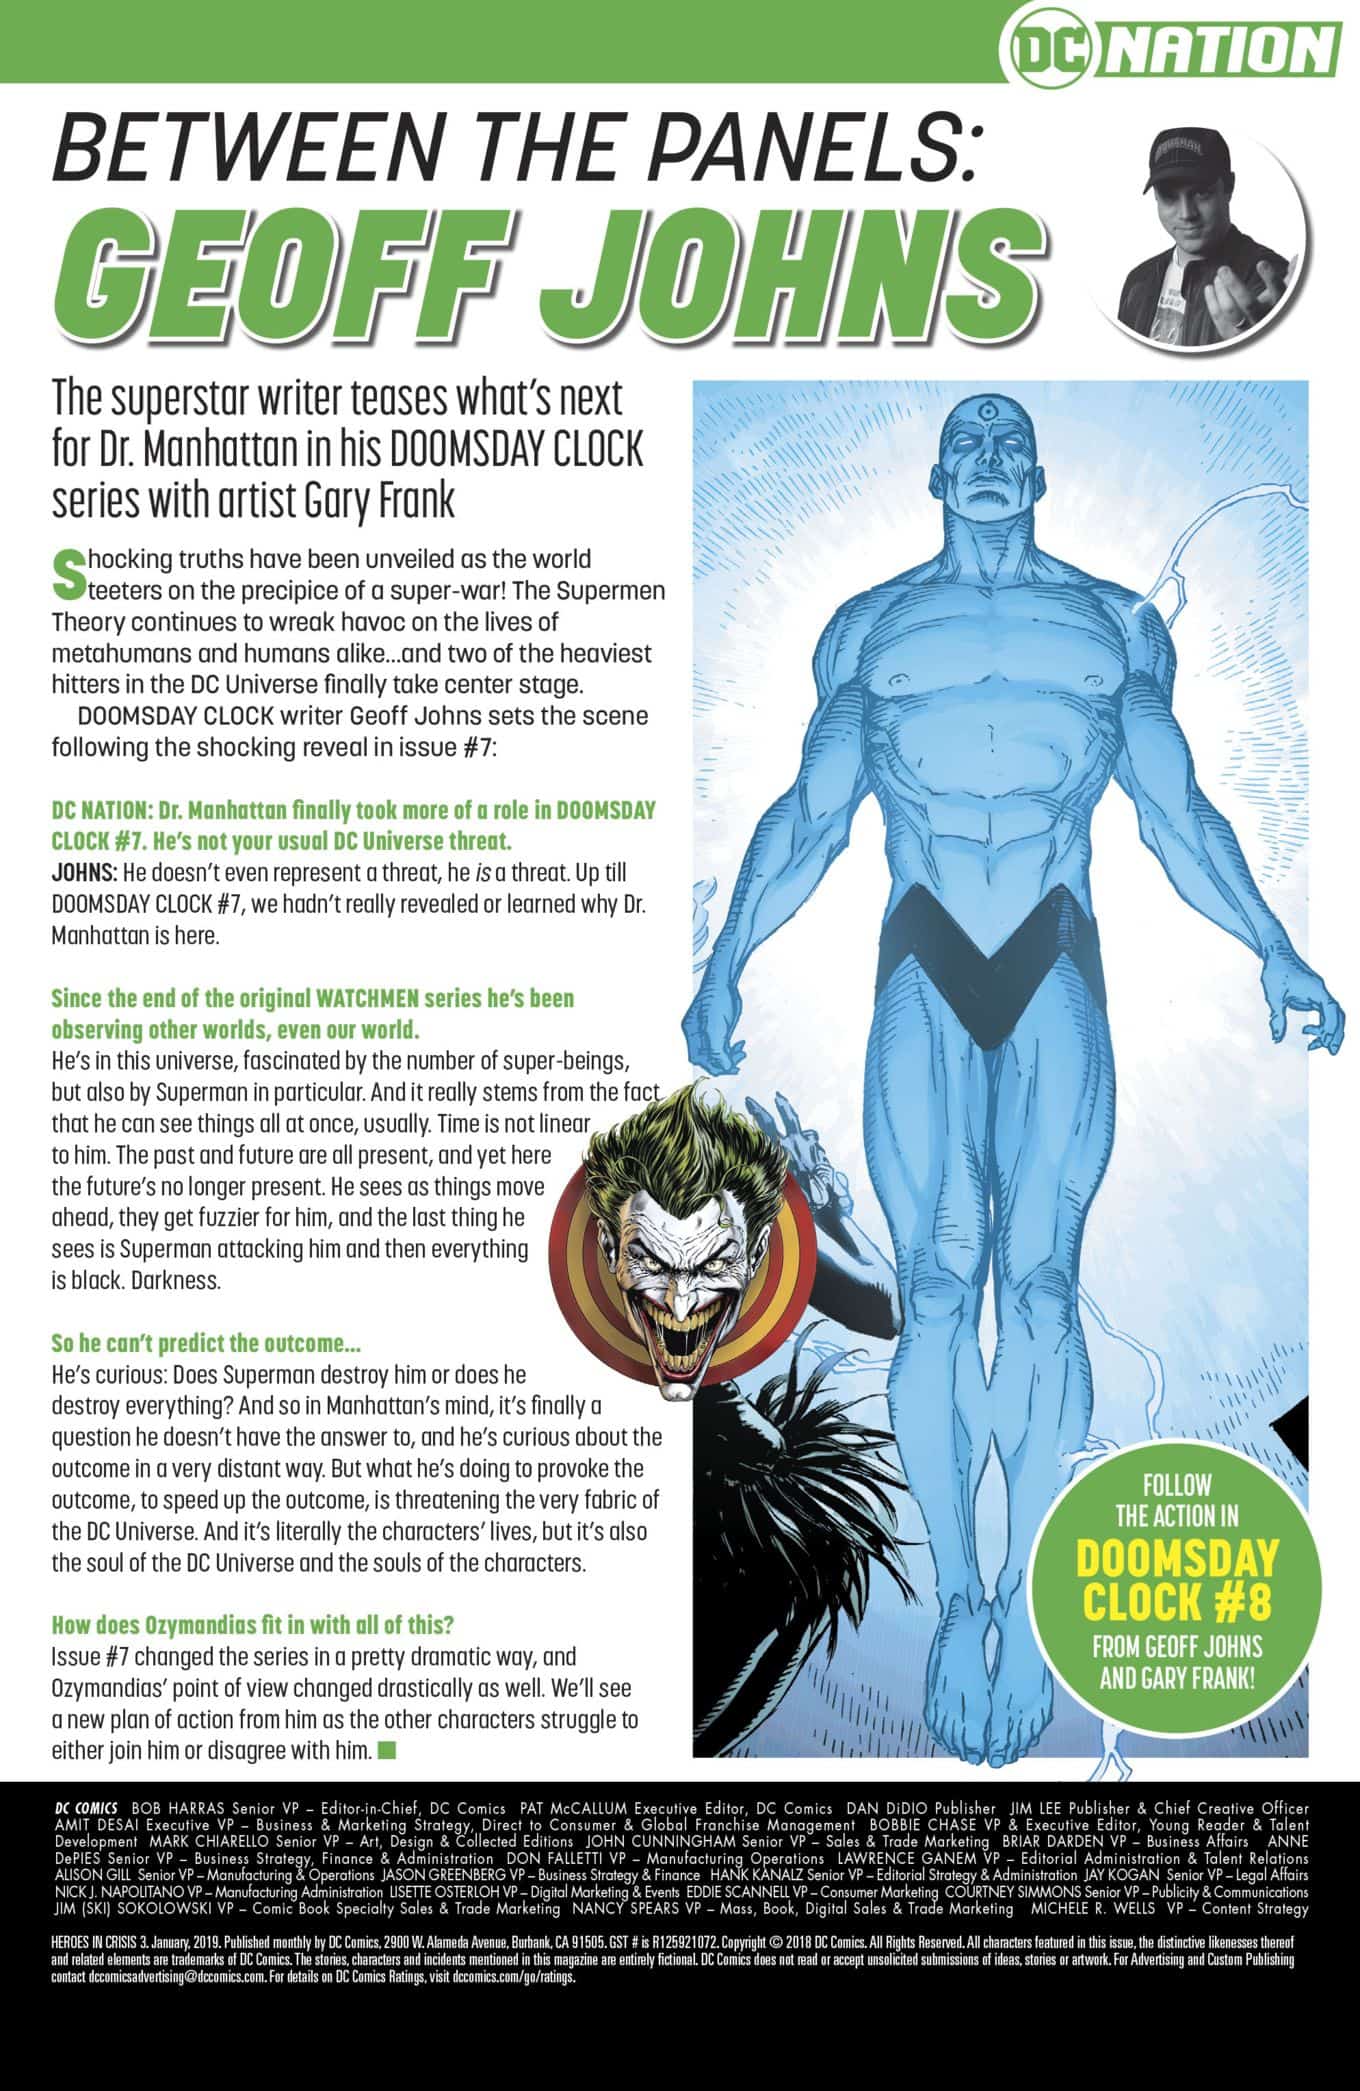 DC Comics Universe & Doomsday Clock #8 Spoilers: Geoff Johns Teases Next Issue Of The ...